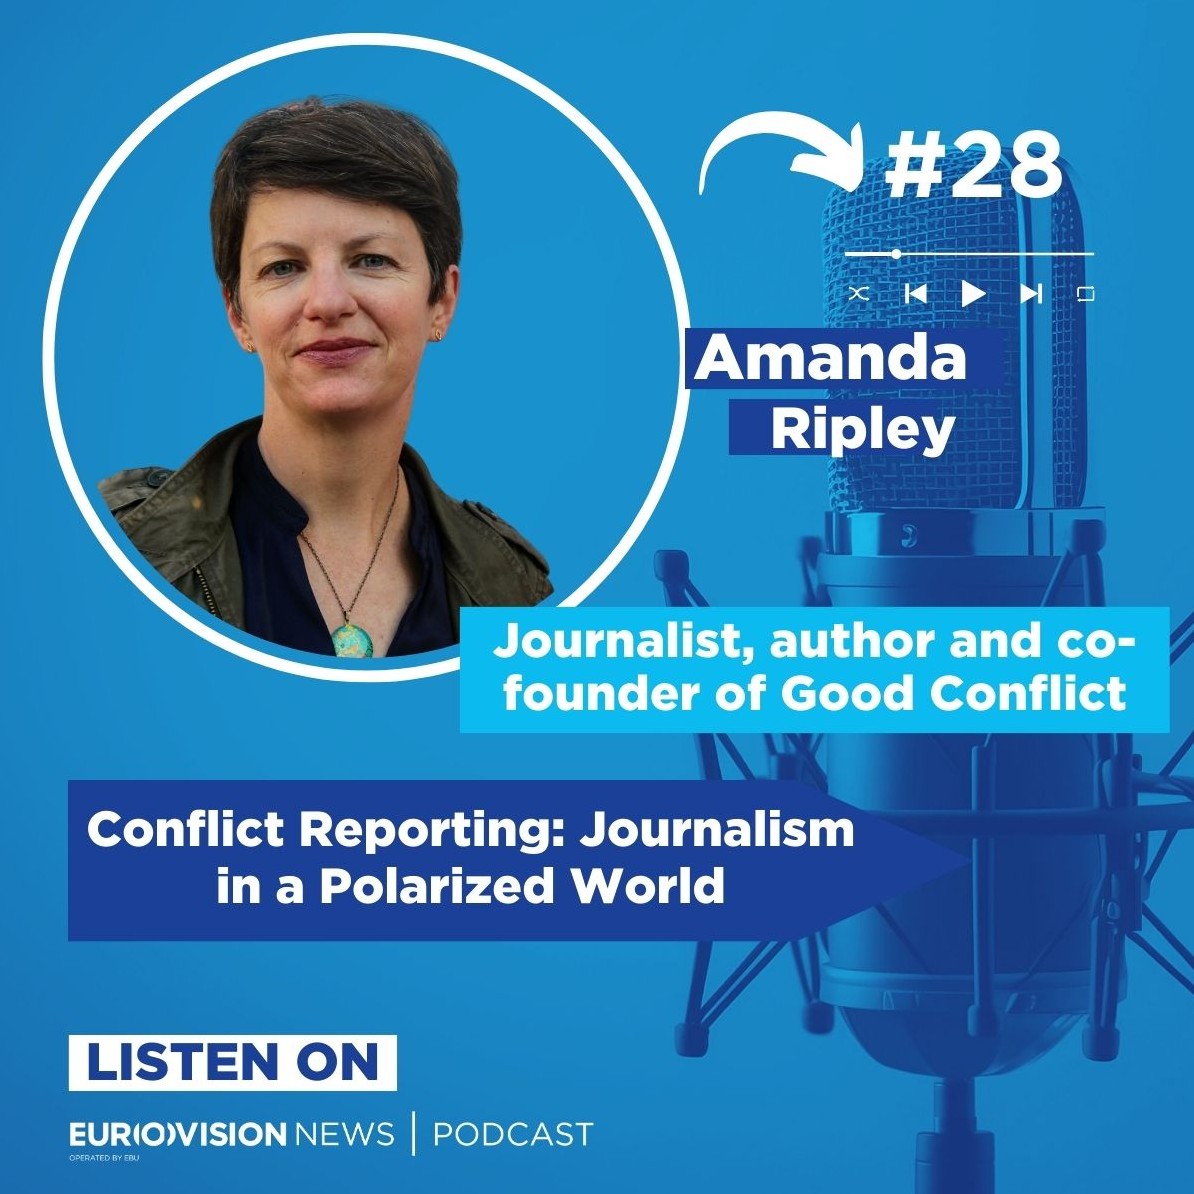 Conflict Reporting: Journalism in a Polarized World with Amanda Ripley